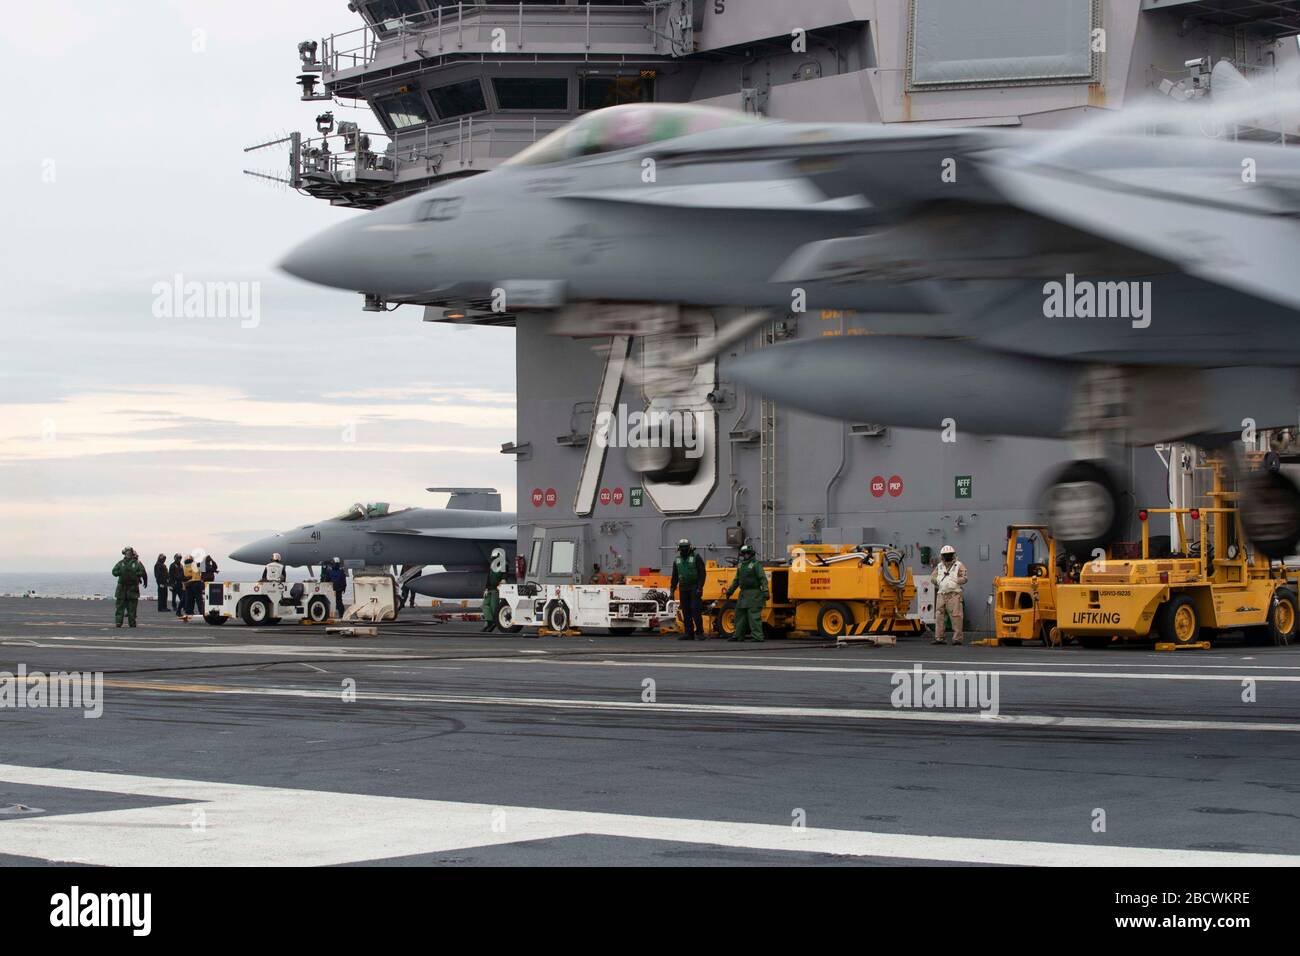 U.S. Navy F/A-18F Super Hornet fighter aircraft, with the Ragin' Bulls of Flight Squadron 37, land on the flight deck of the Ford-class aircraft carrier USS Gerald R. Ford underway conducting its flight deck and combat air traffic control center certification March 23, 2020 in the Atlantic Ocean. Stock Photo